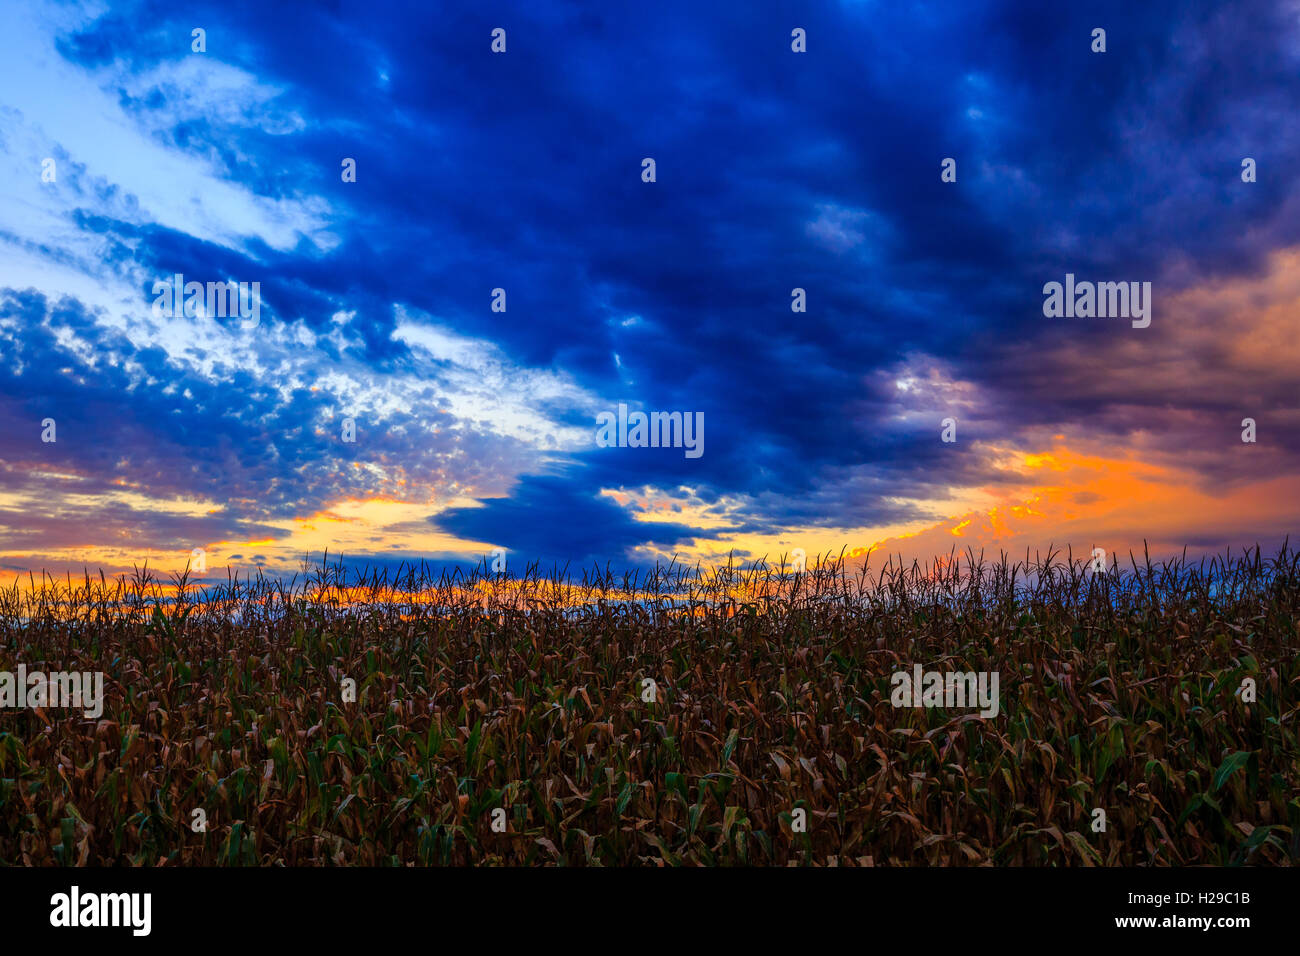 Field of corn with a colorful sunset. Stock Photo